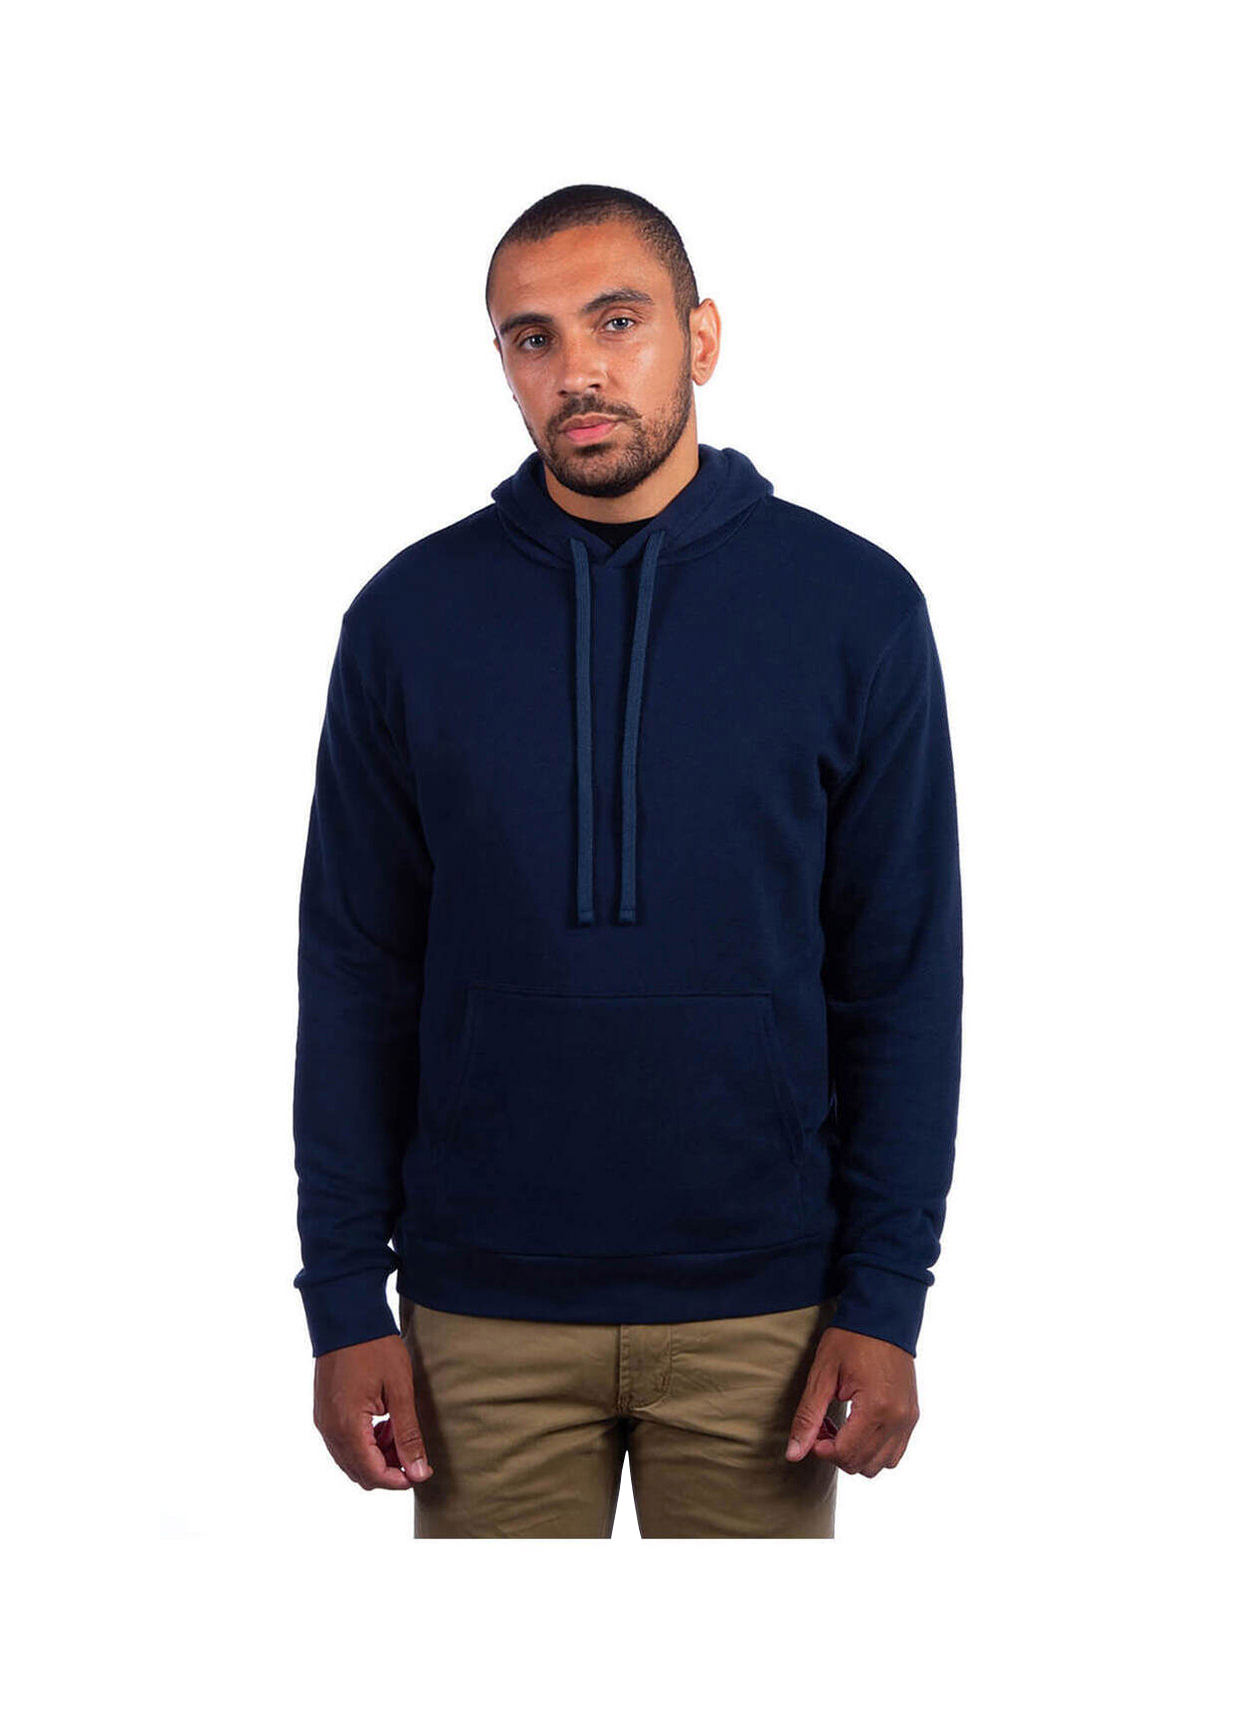 Next Level Men's Midnight Navy Unisex Sueded French Terry Pullover Hoodie